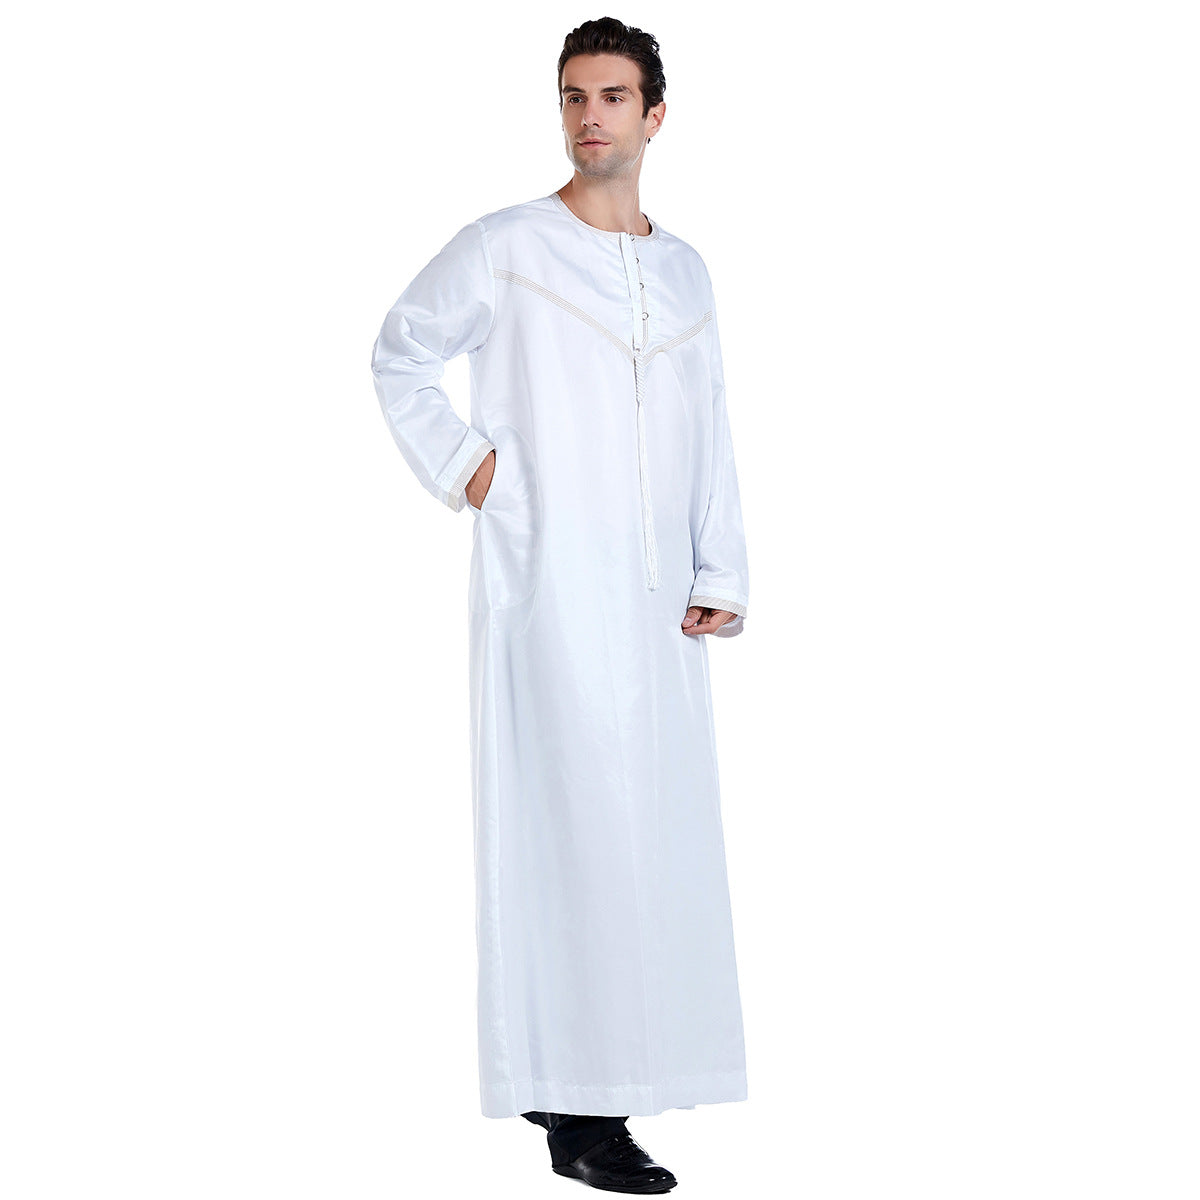 Exclusive Emirati Men's Thobe in White by Hikmah Boutique, a Modest Clothing garment that effortlessly combines traditional Islamic elegance with contemporary Modest style  making it a perfect choice for any occasion like Eid, Ramadan or Muslim Islamic Wedding.